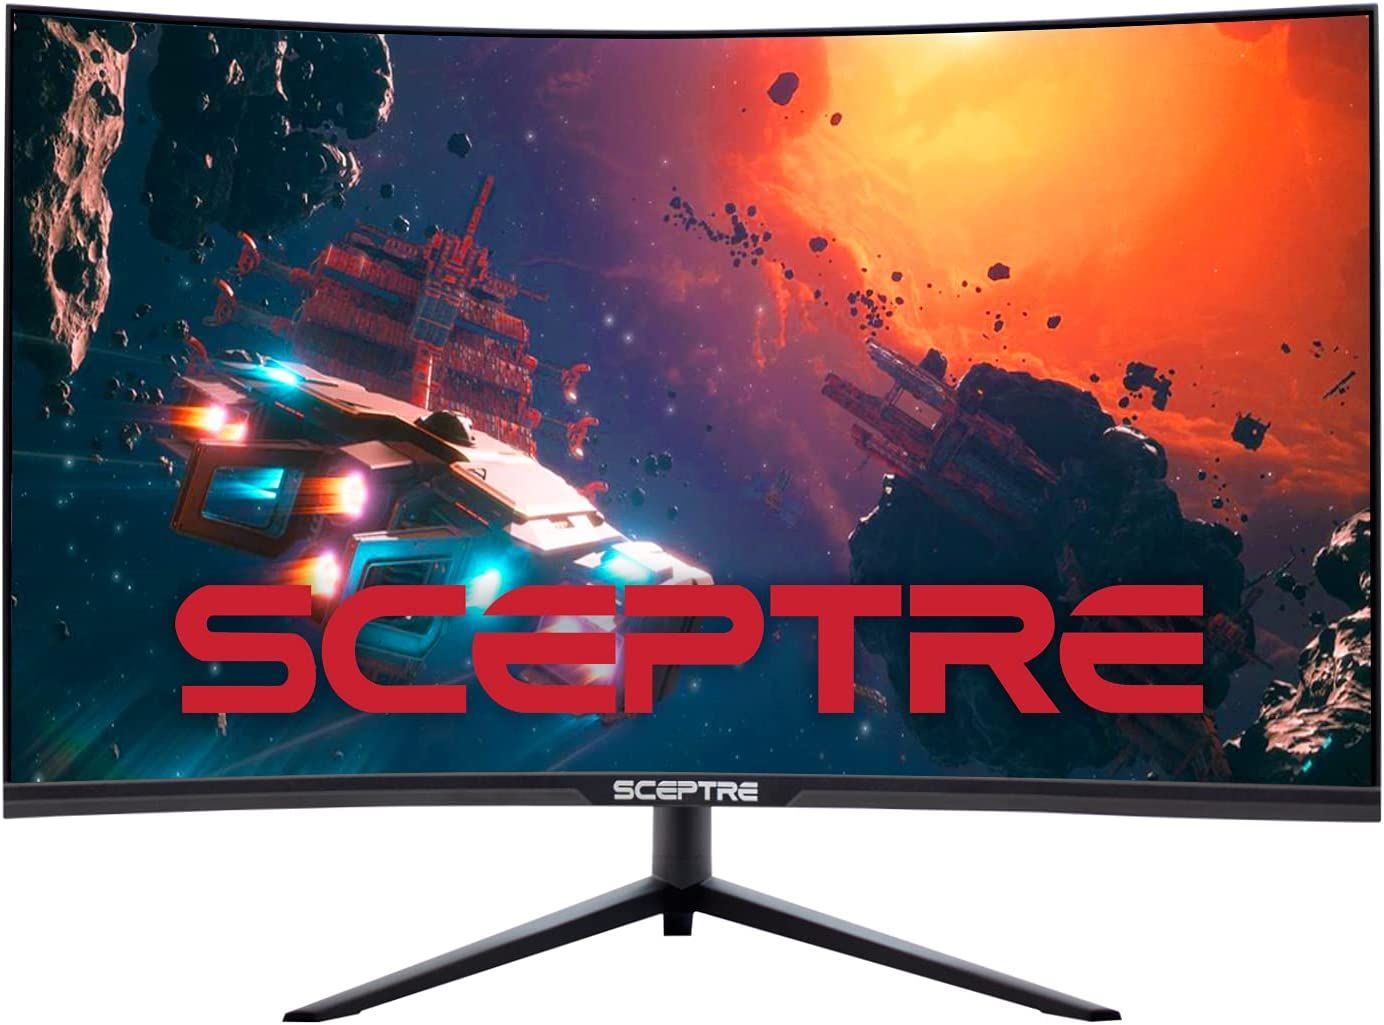 The Best 1440p Gaming Monitors: 1H 2023